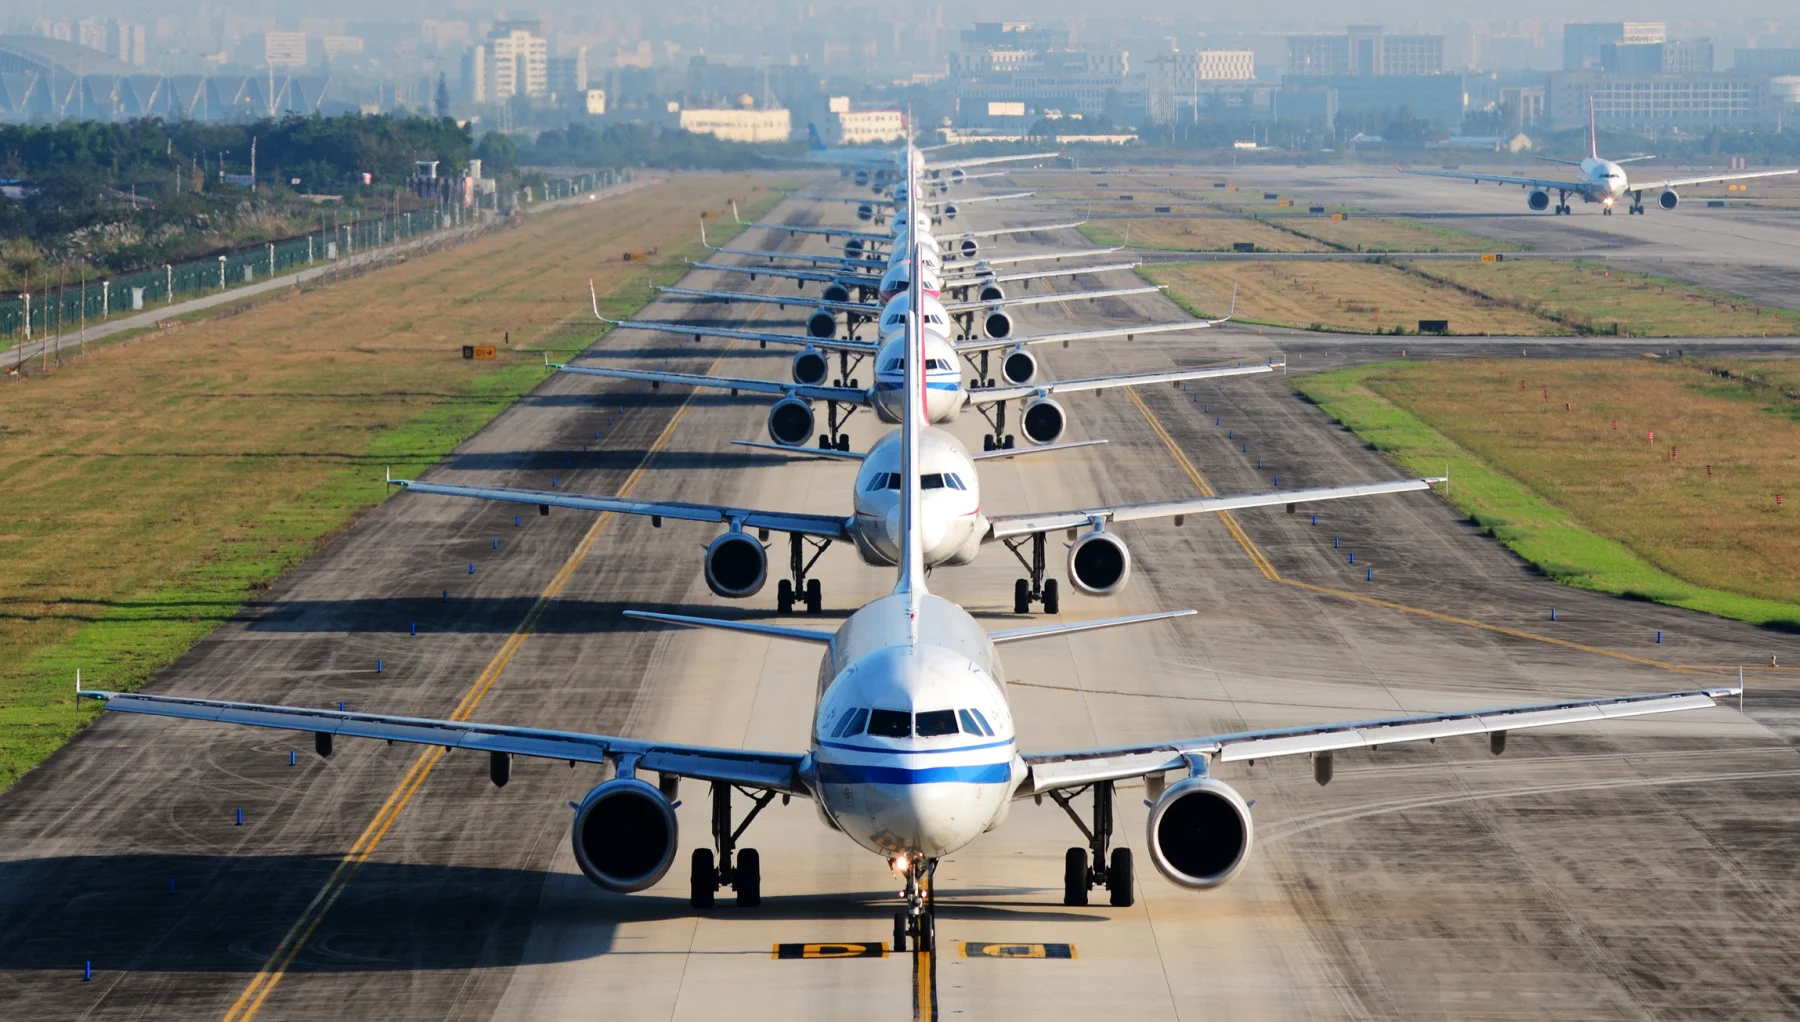 planes waiting for take off (Jingying Zhao/ Moment/ Getty Images)